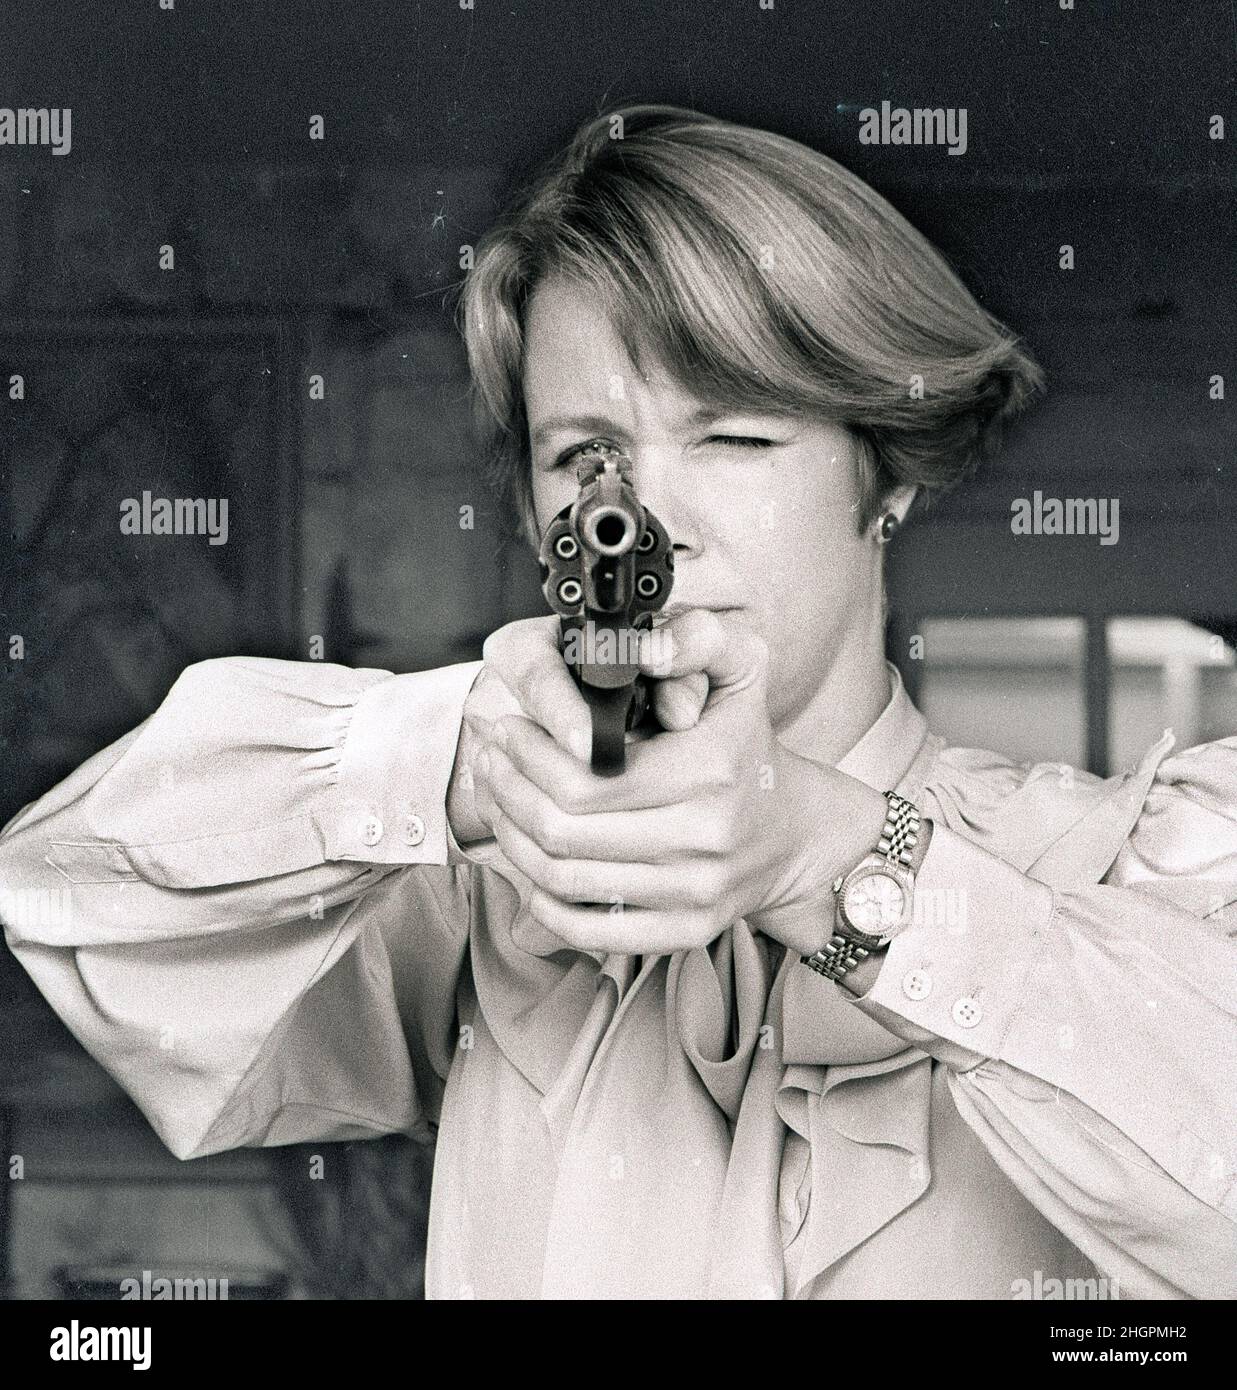 cheryl b takes aim with her smith & wesson 357 magnum pistol whic she has for protection for herself and family. photo was front page on the Sunday Boston Herald edition for a story on women arming themselves in 1994  photo by bill belknap Stock Photo